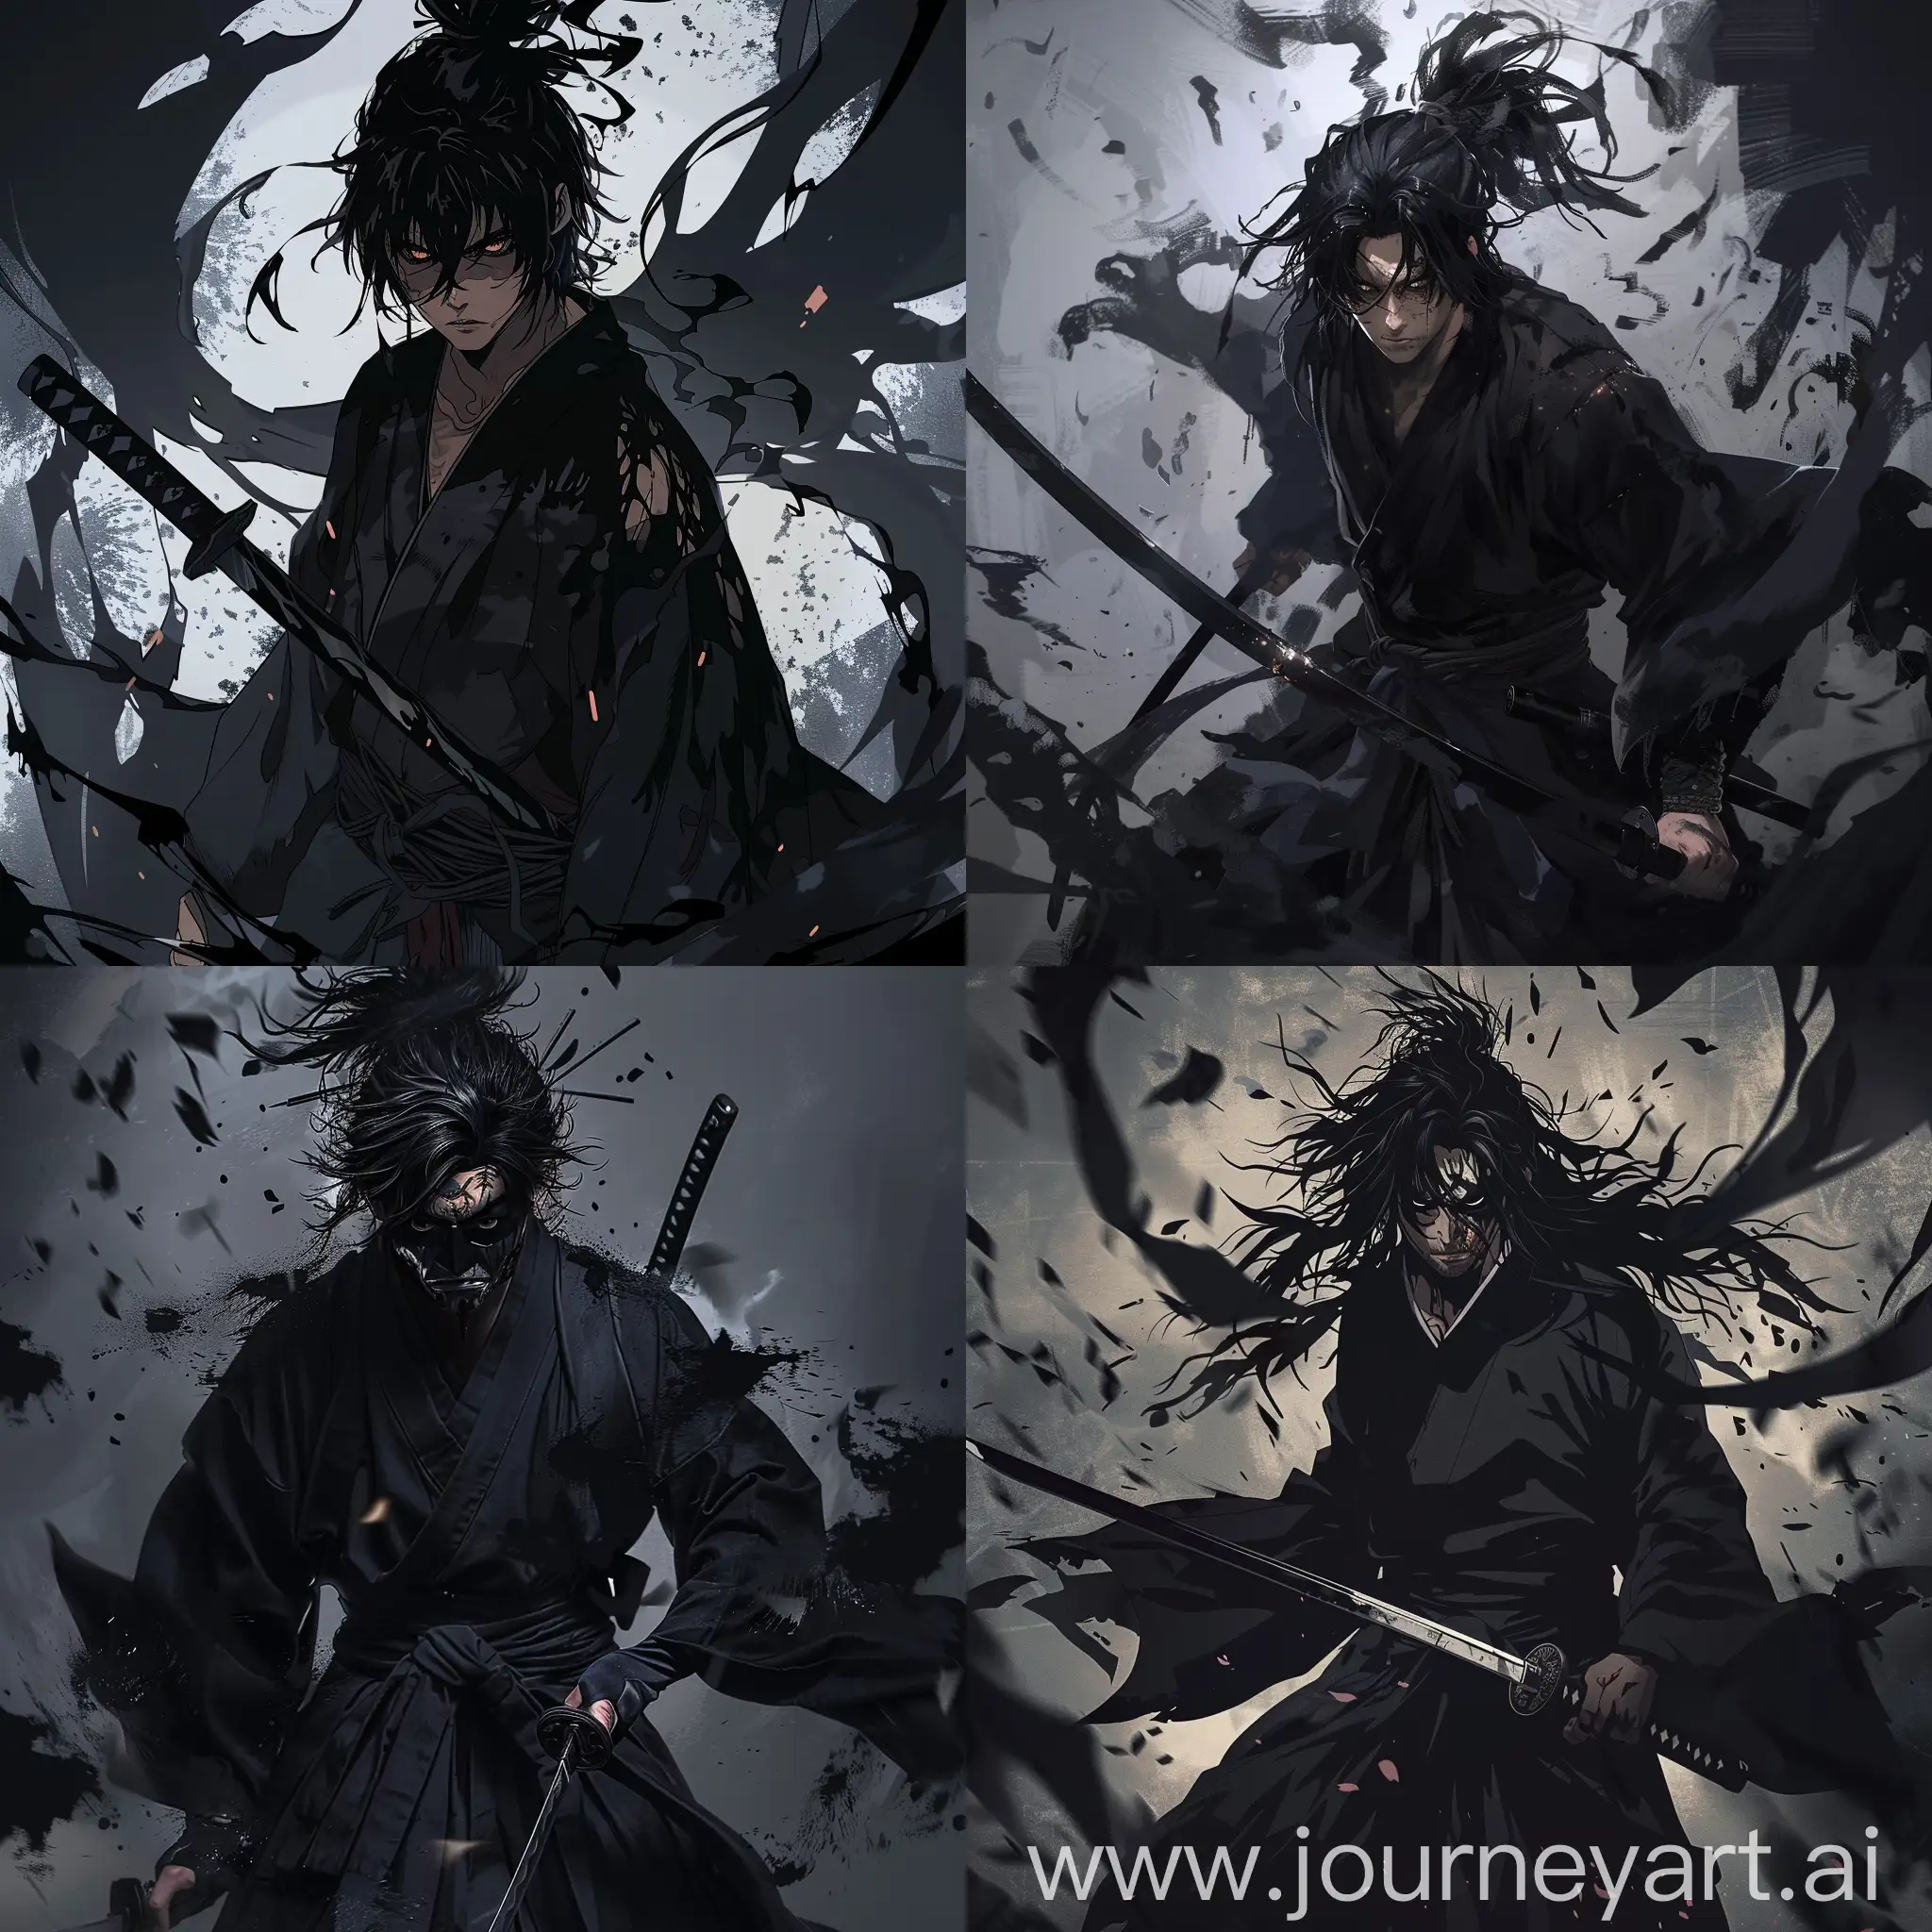 Black haired male, full body, black kimono, black katana, vagabond manga style, surrounded by shadows, anger and sadness, oni mask, shadows leaking from he blade, death stare, oni